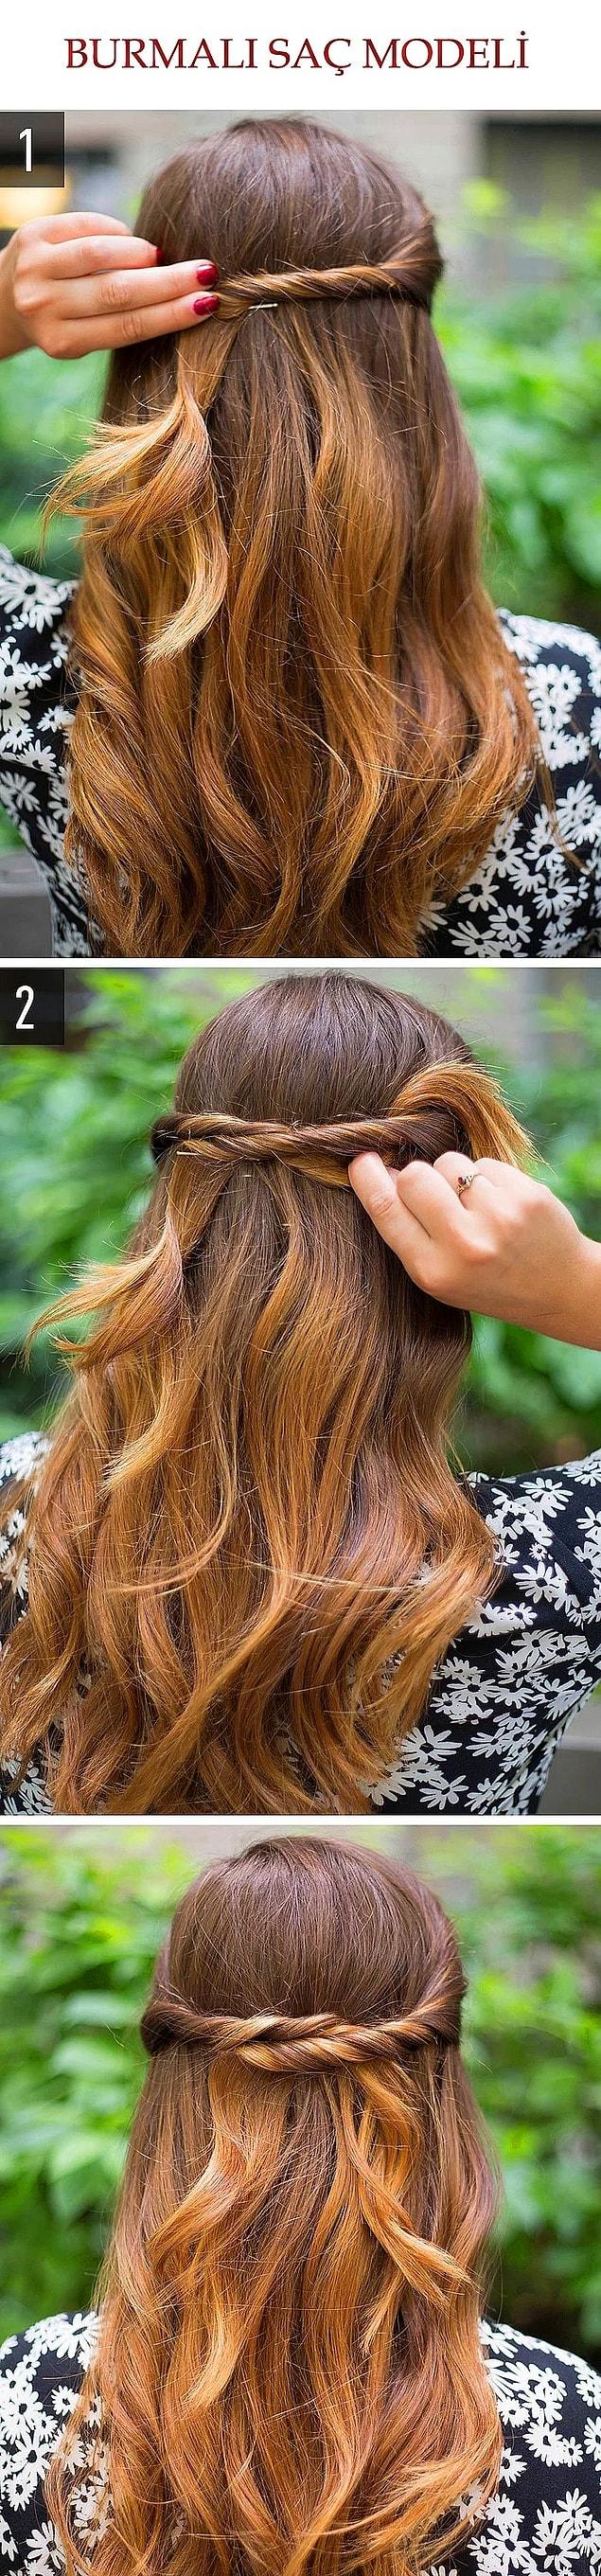 18. This easy hairstyle looks awesome!